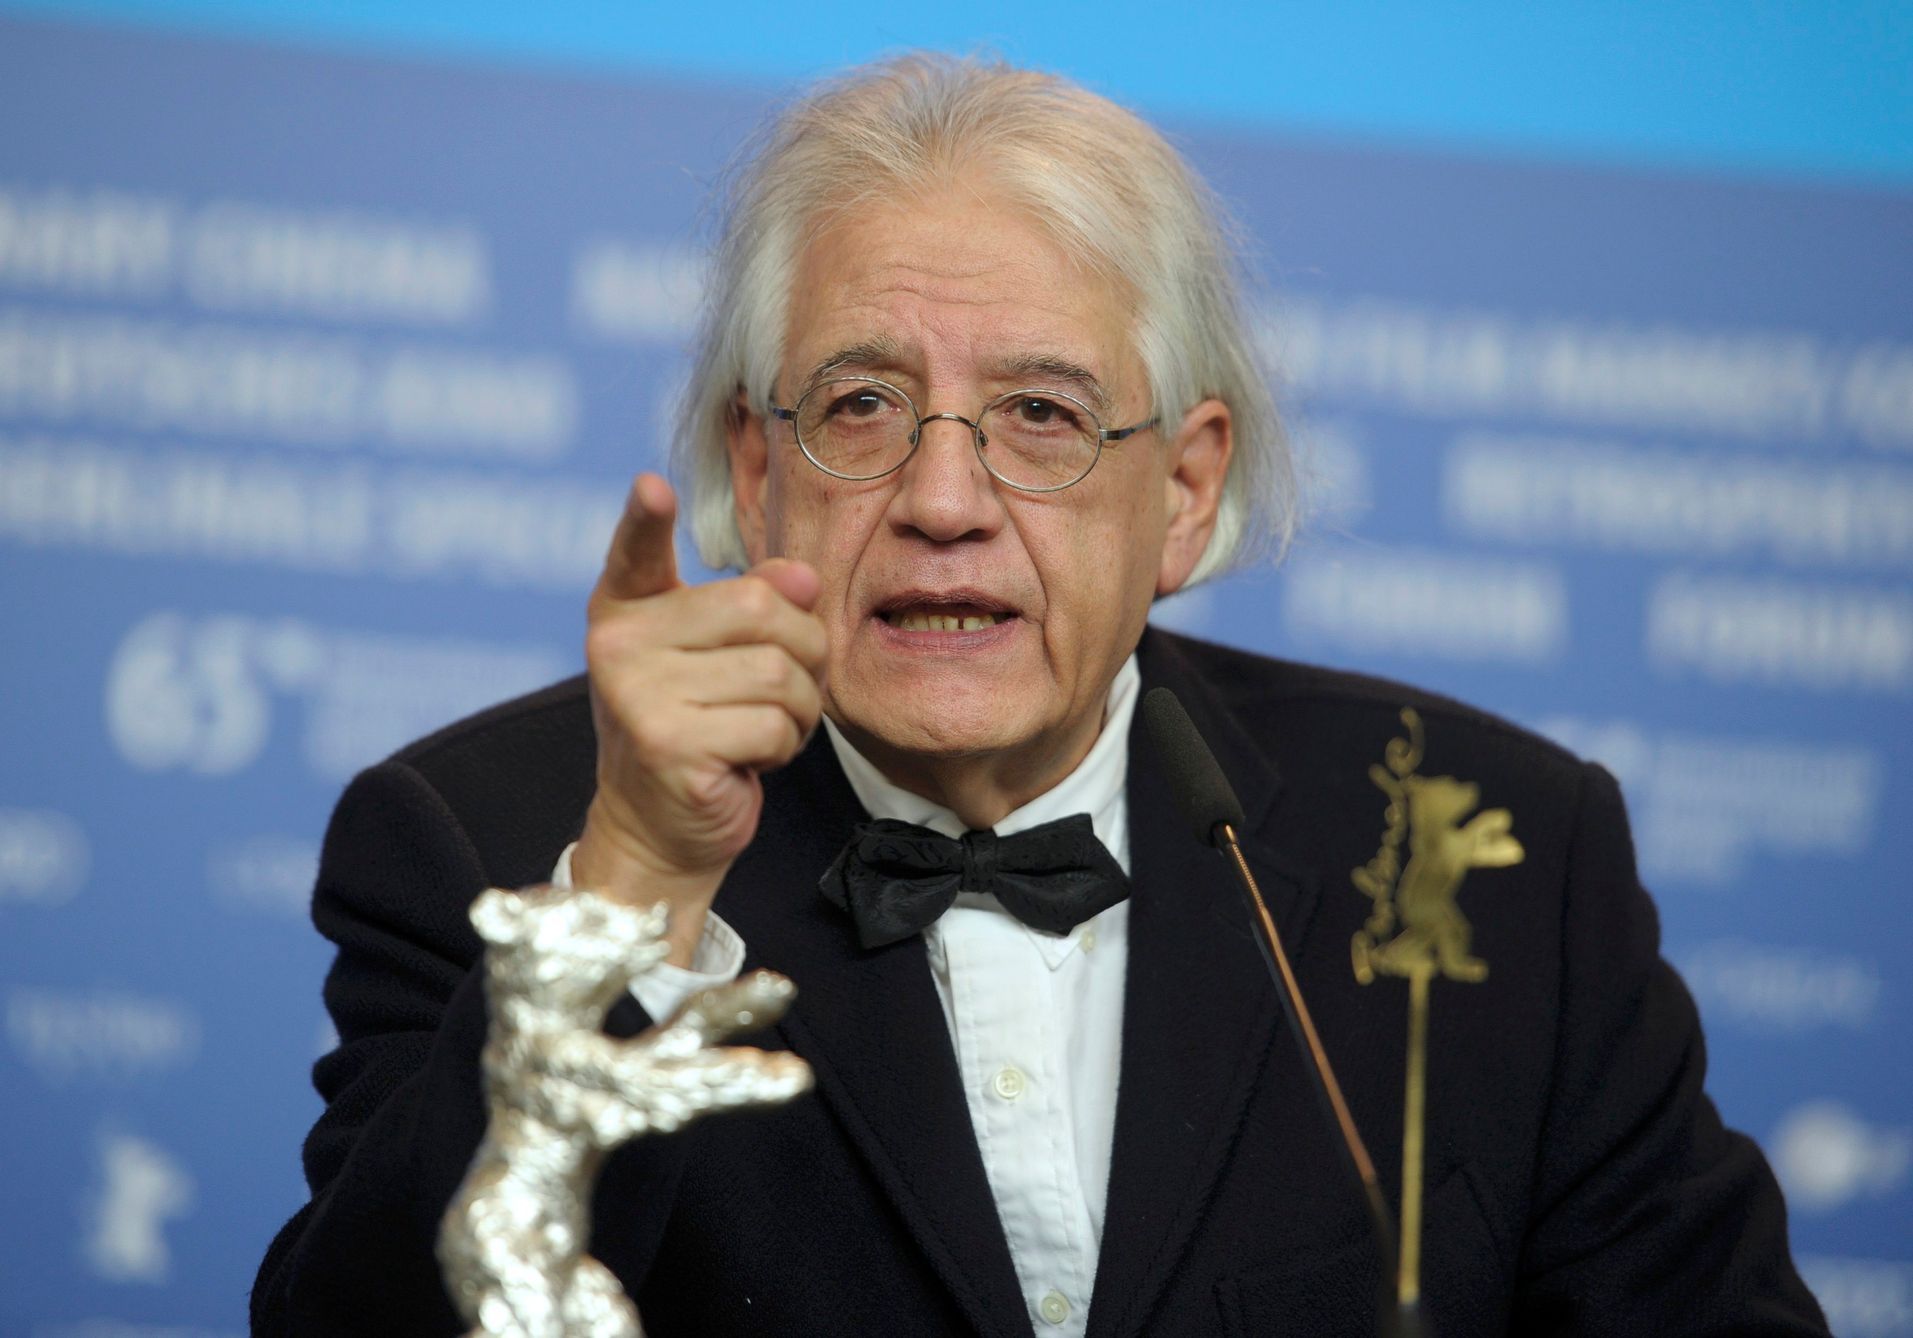 Director Guzman addresses news conference after awards ceremony of 65th Berlinale International Film Festival in Berlin